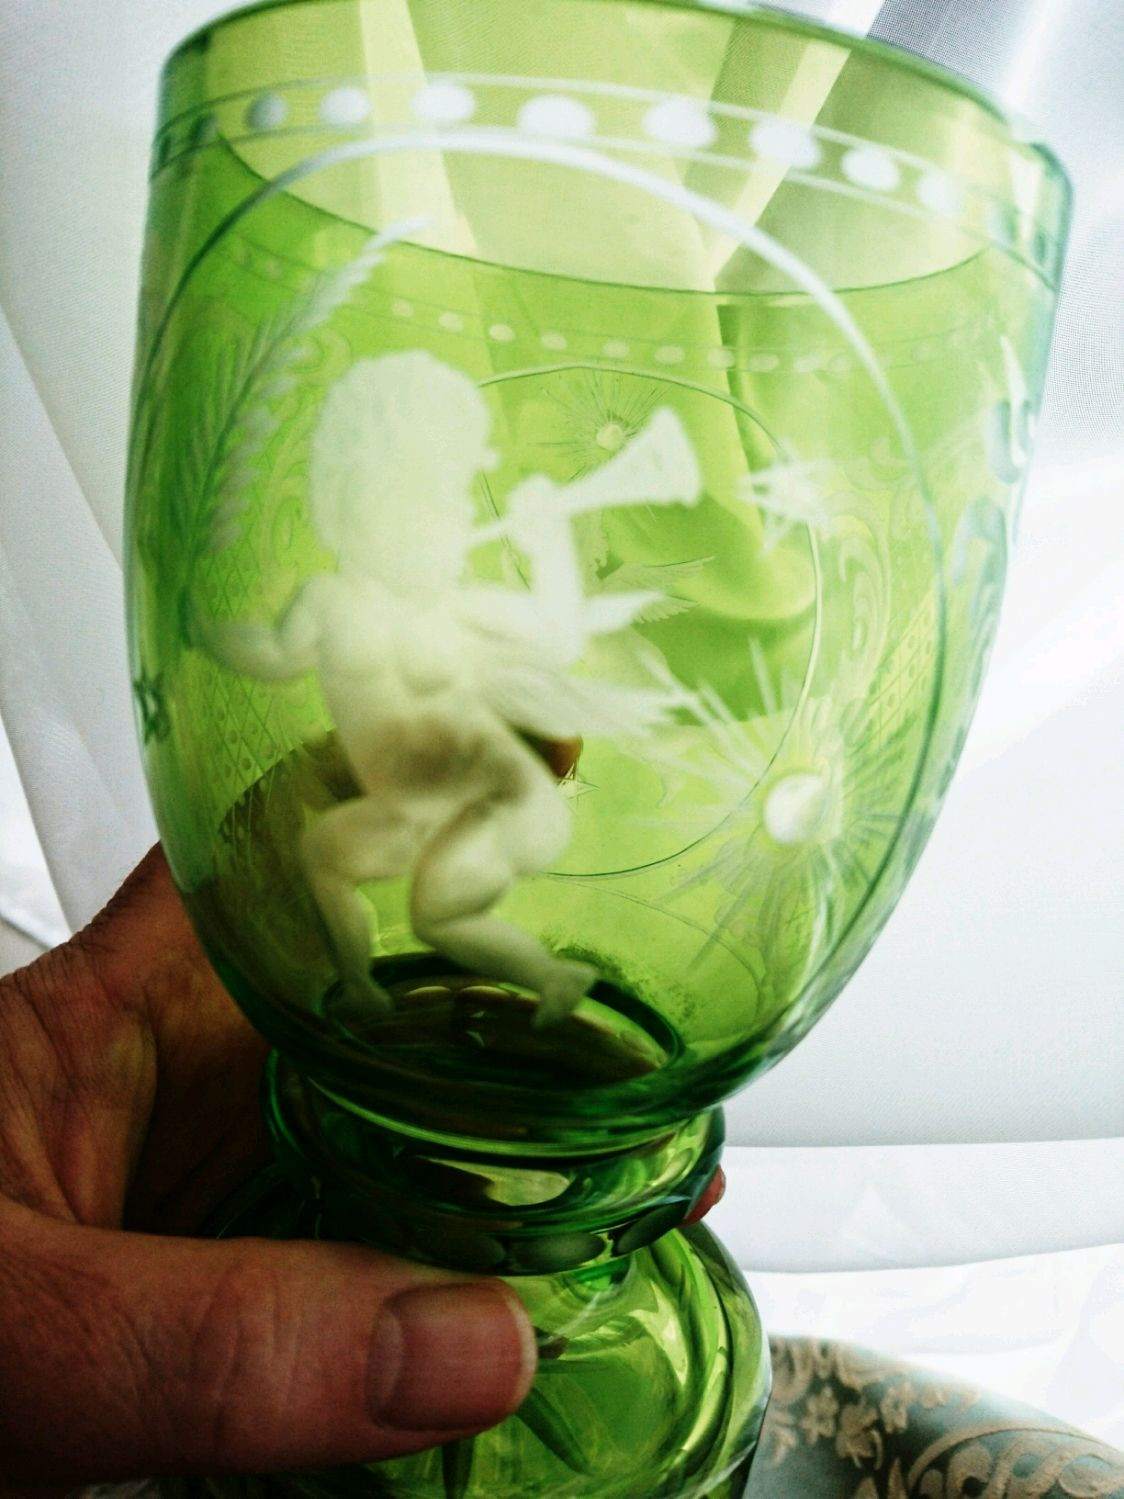 10 Nice Antique Green Glass Vases 2023 free download antique green glass vases of vintage vase cup cupid shop online on livemaster with shipping with regard to vintage interior decor vintage vase cup cupid antik vintic my livemaster